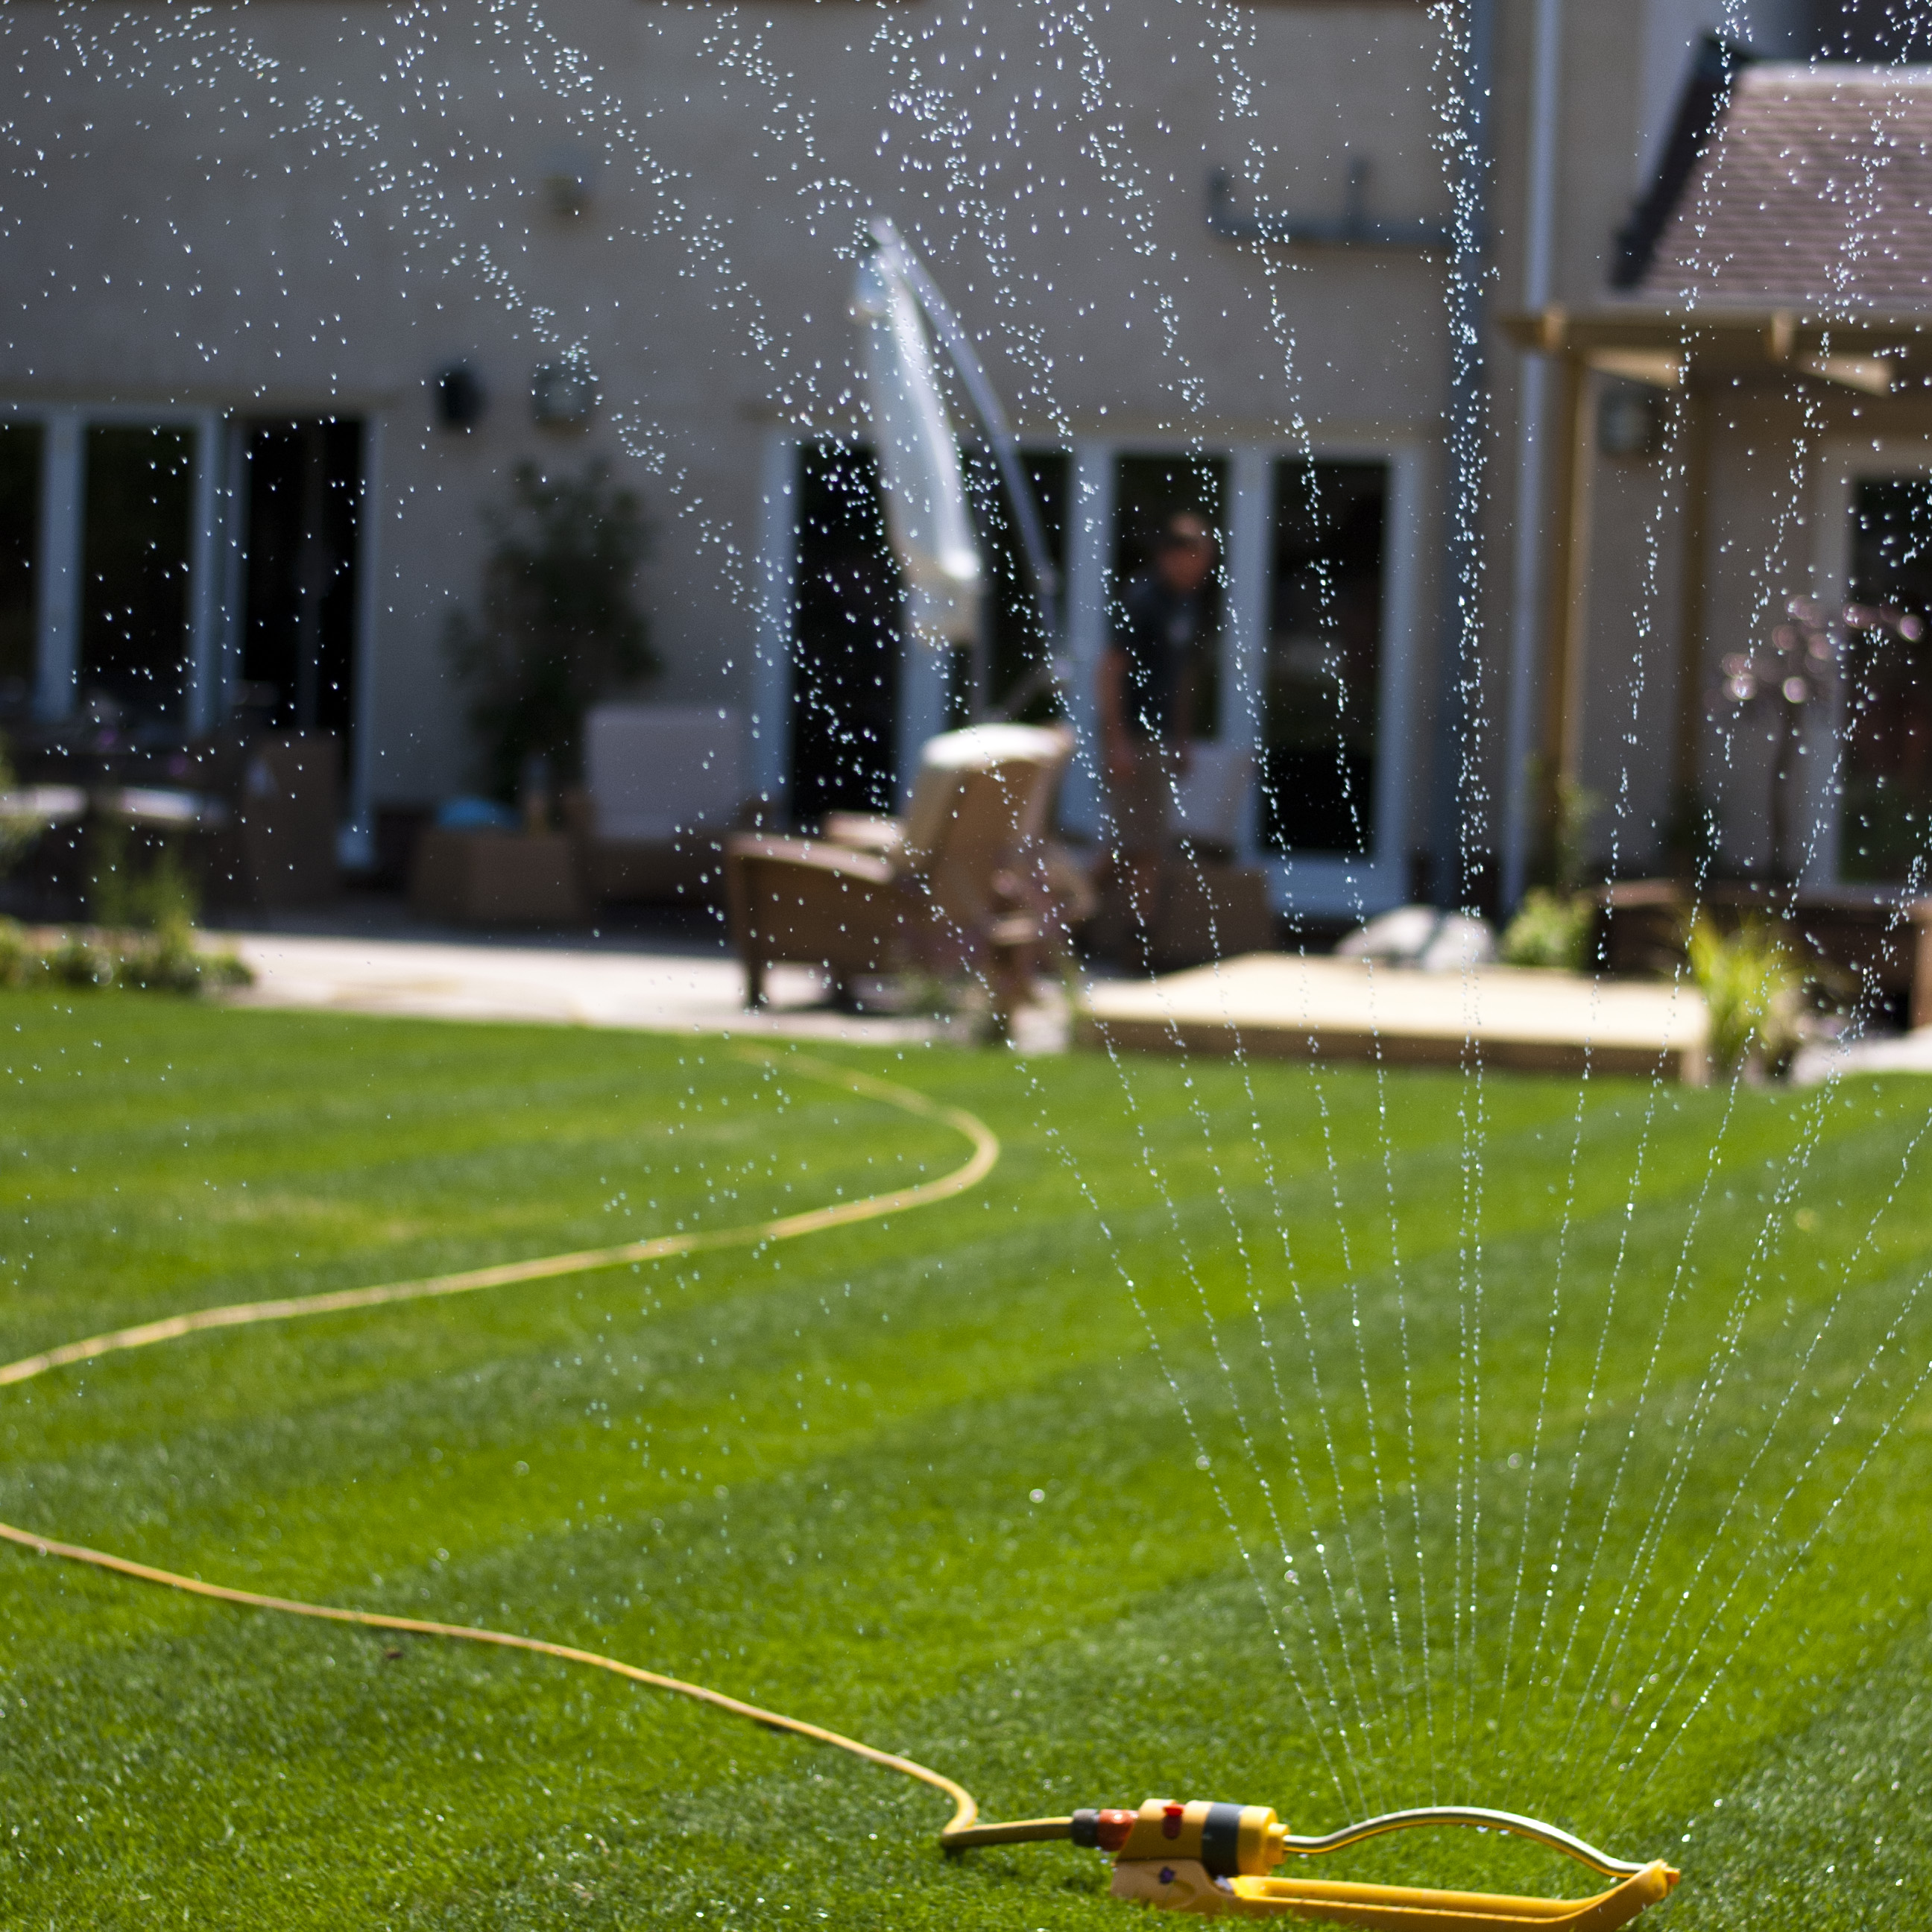 Best Lawn Sprinkler: Oscillating, Rotary, Stationary, or Traveling